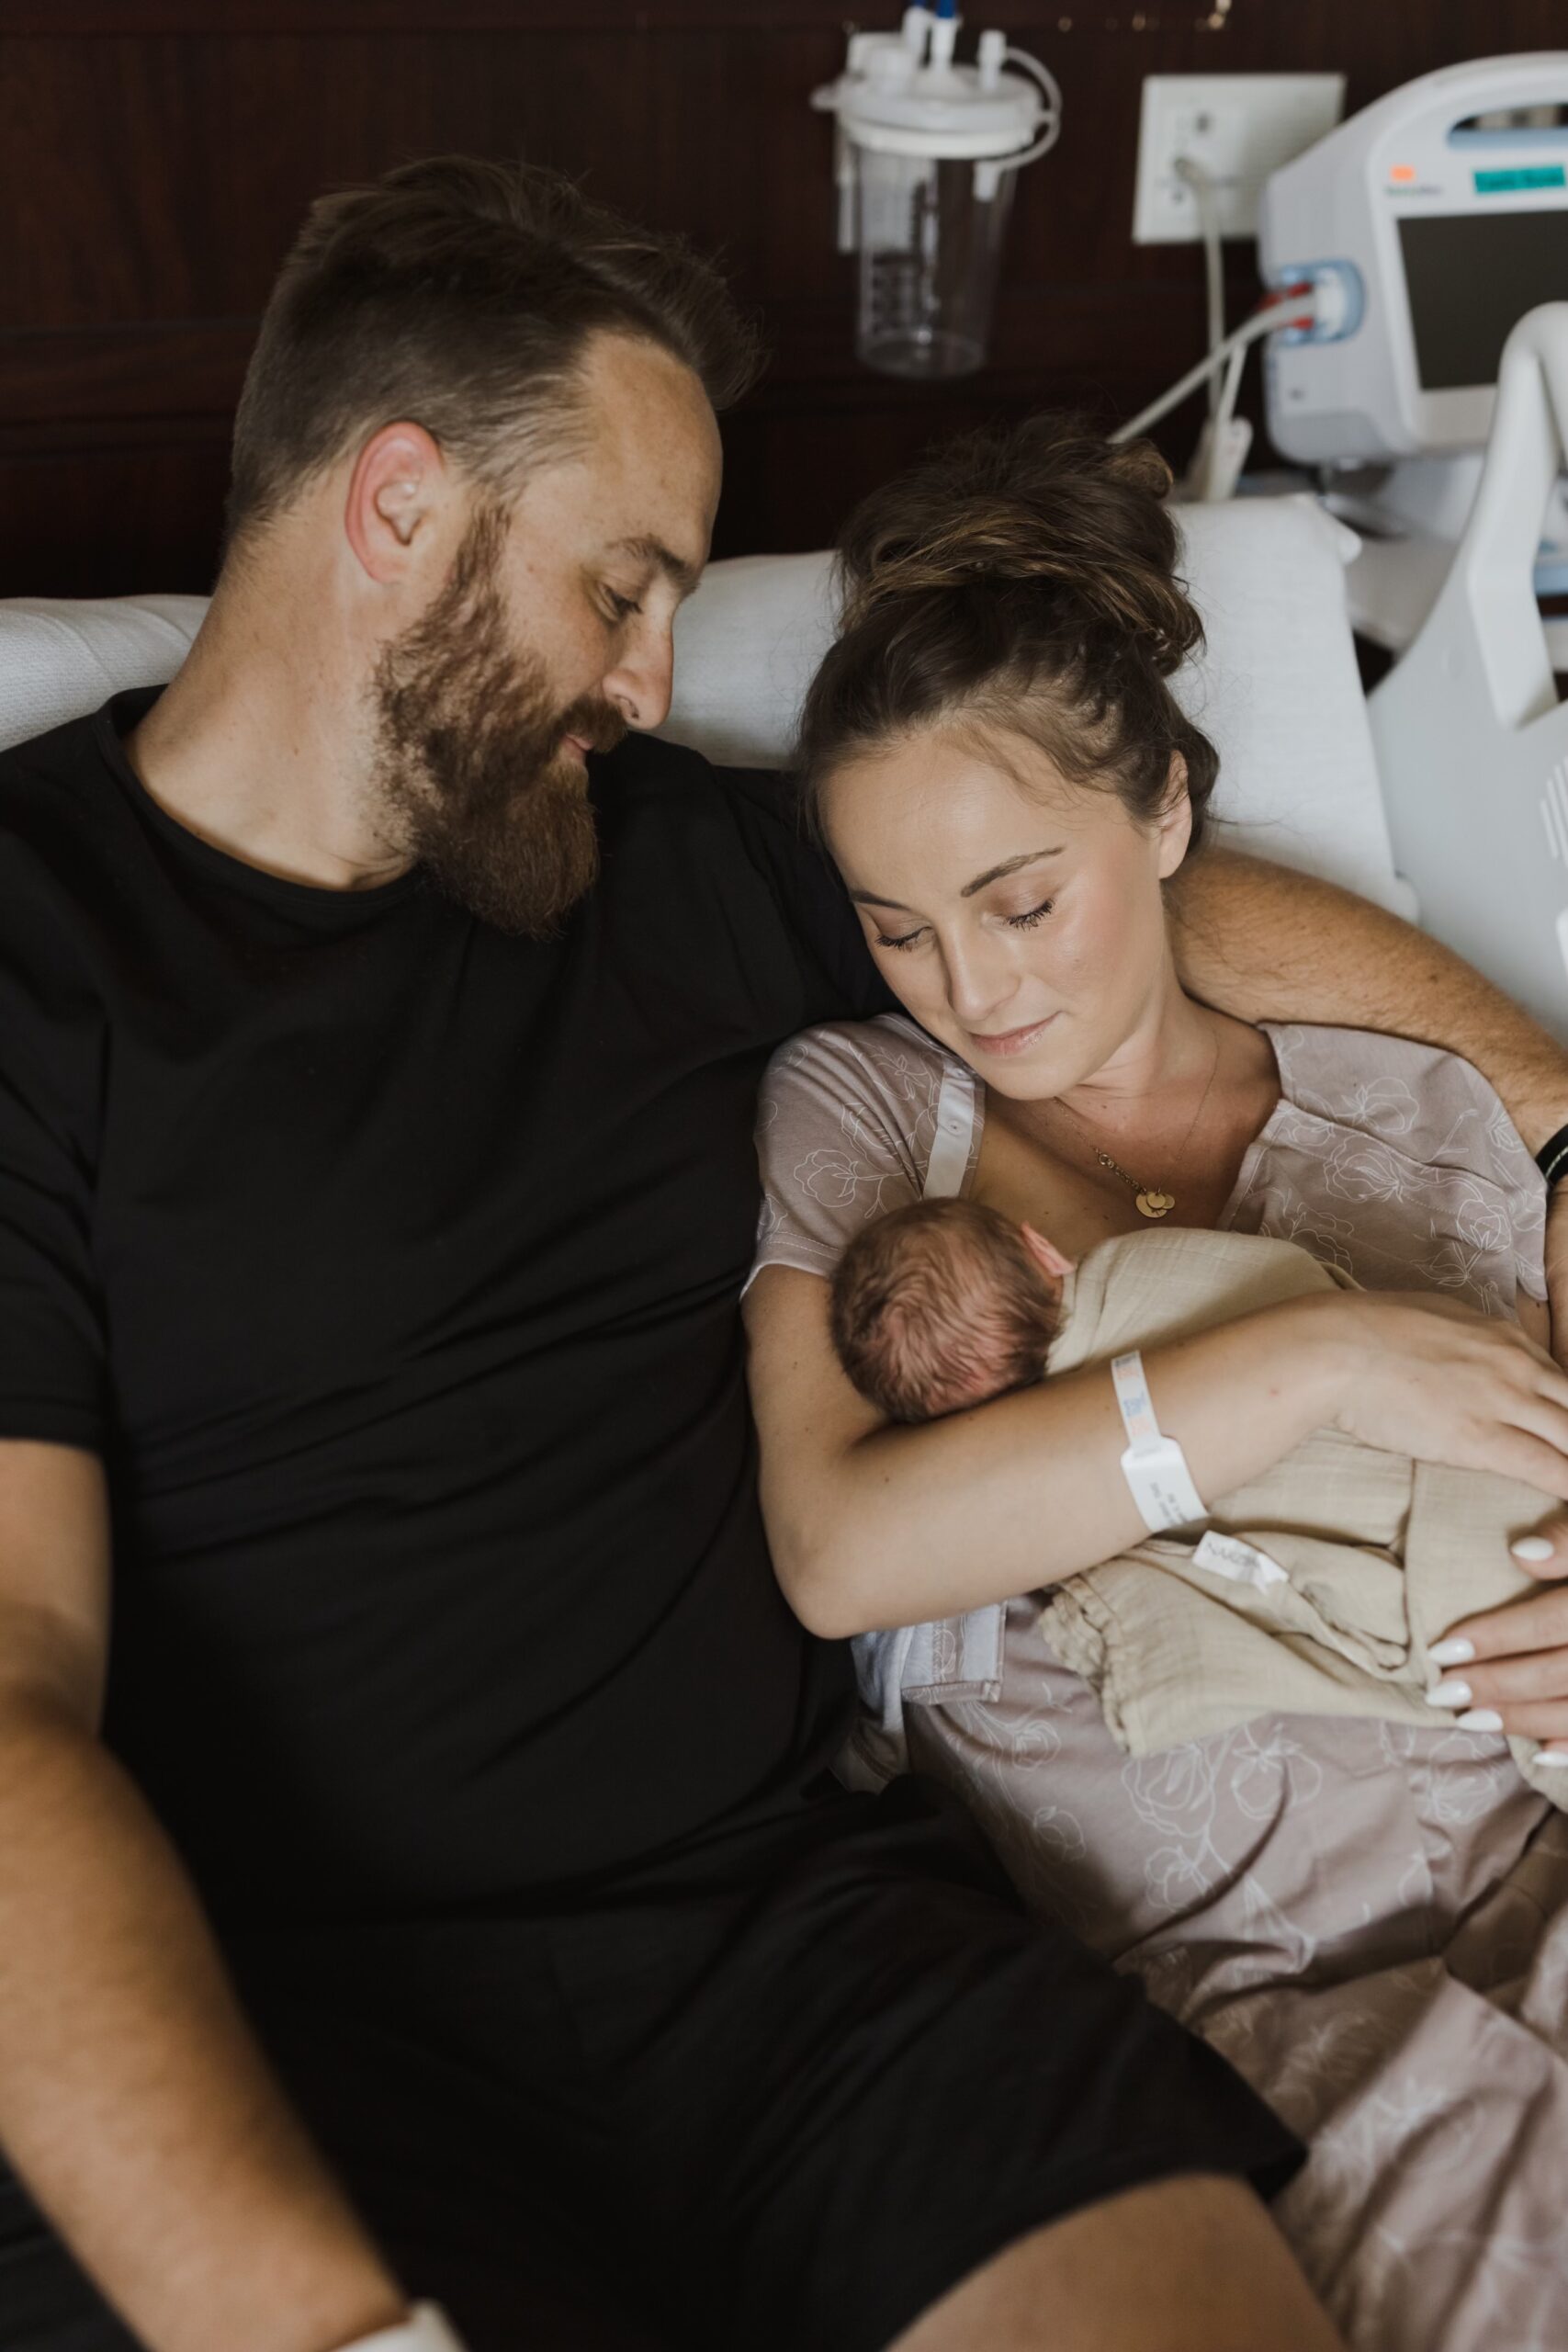 This image shows Jordan in the hospital with her husband, holding their newborn son, Shepherd.